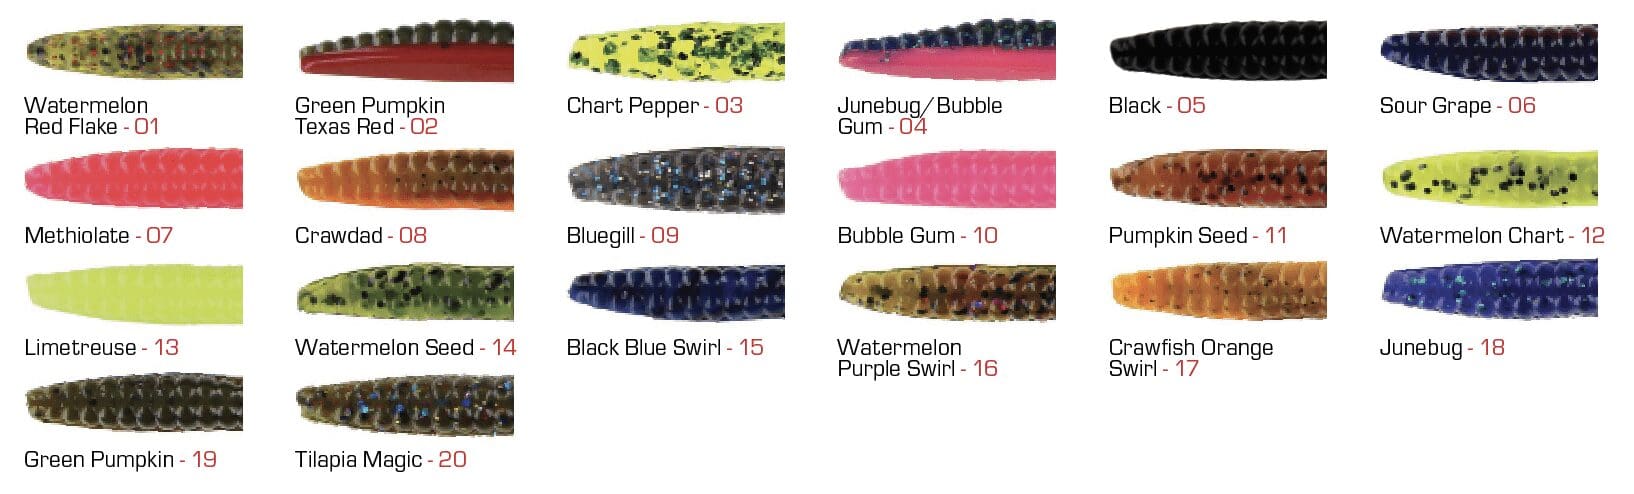 Big Bite Baits 6 inch Finesse Worm Lure, Pack of 100, Green